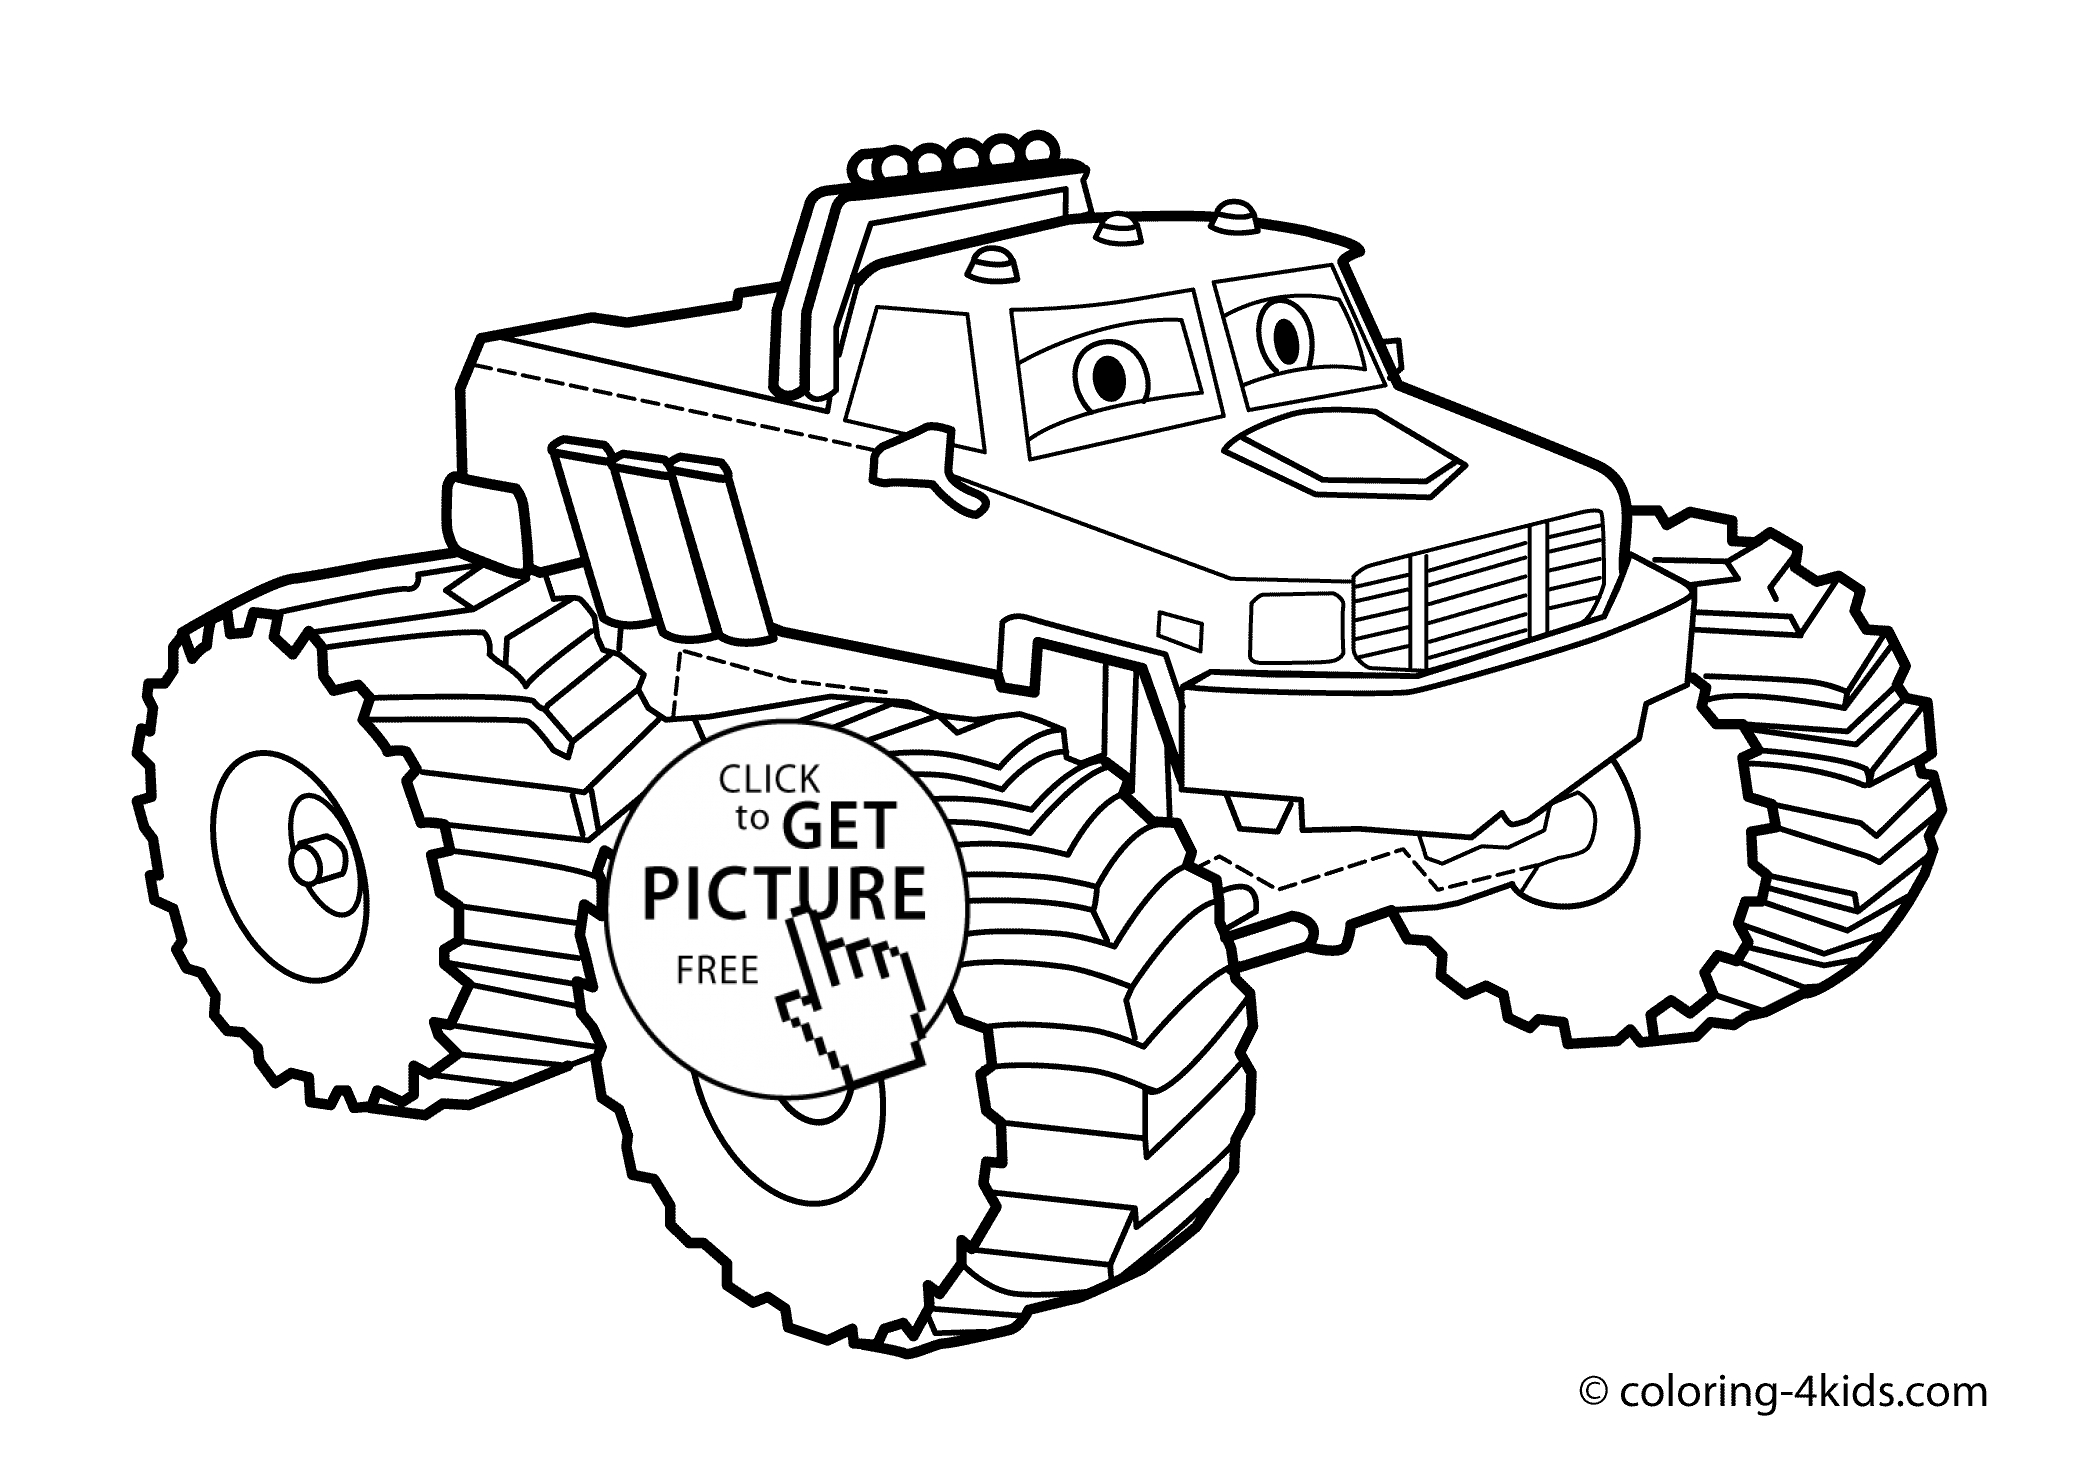 Truck Coloring Pages For Preschoolers Monster Truck Coloring Page For Kids Monster Truck Coloring Books